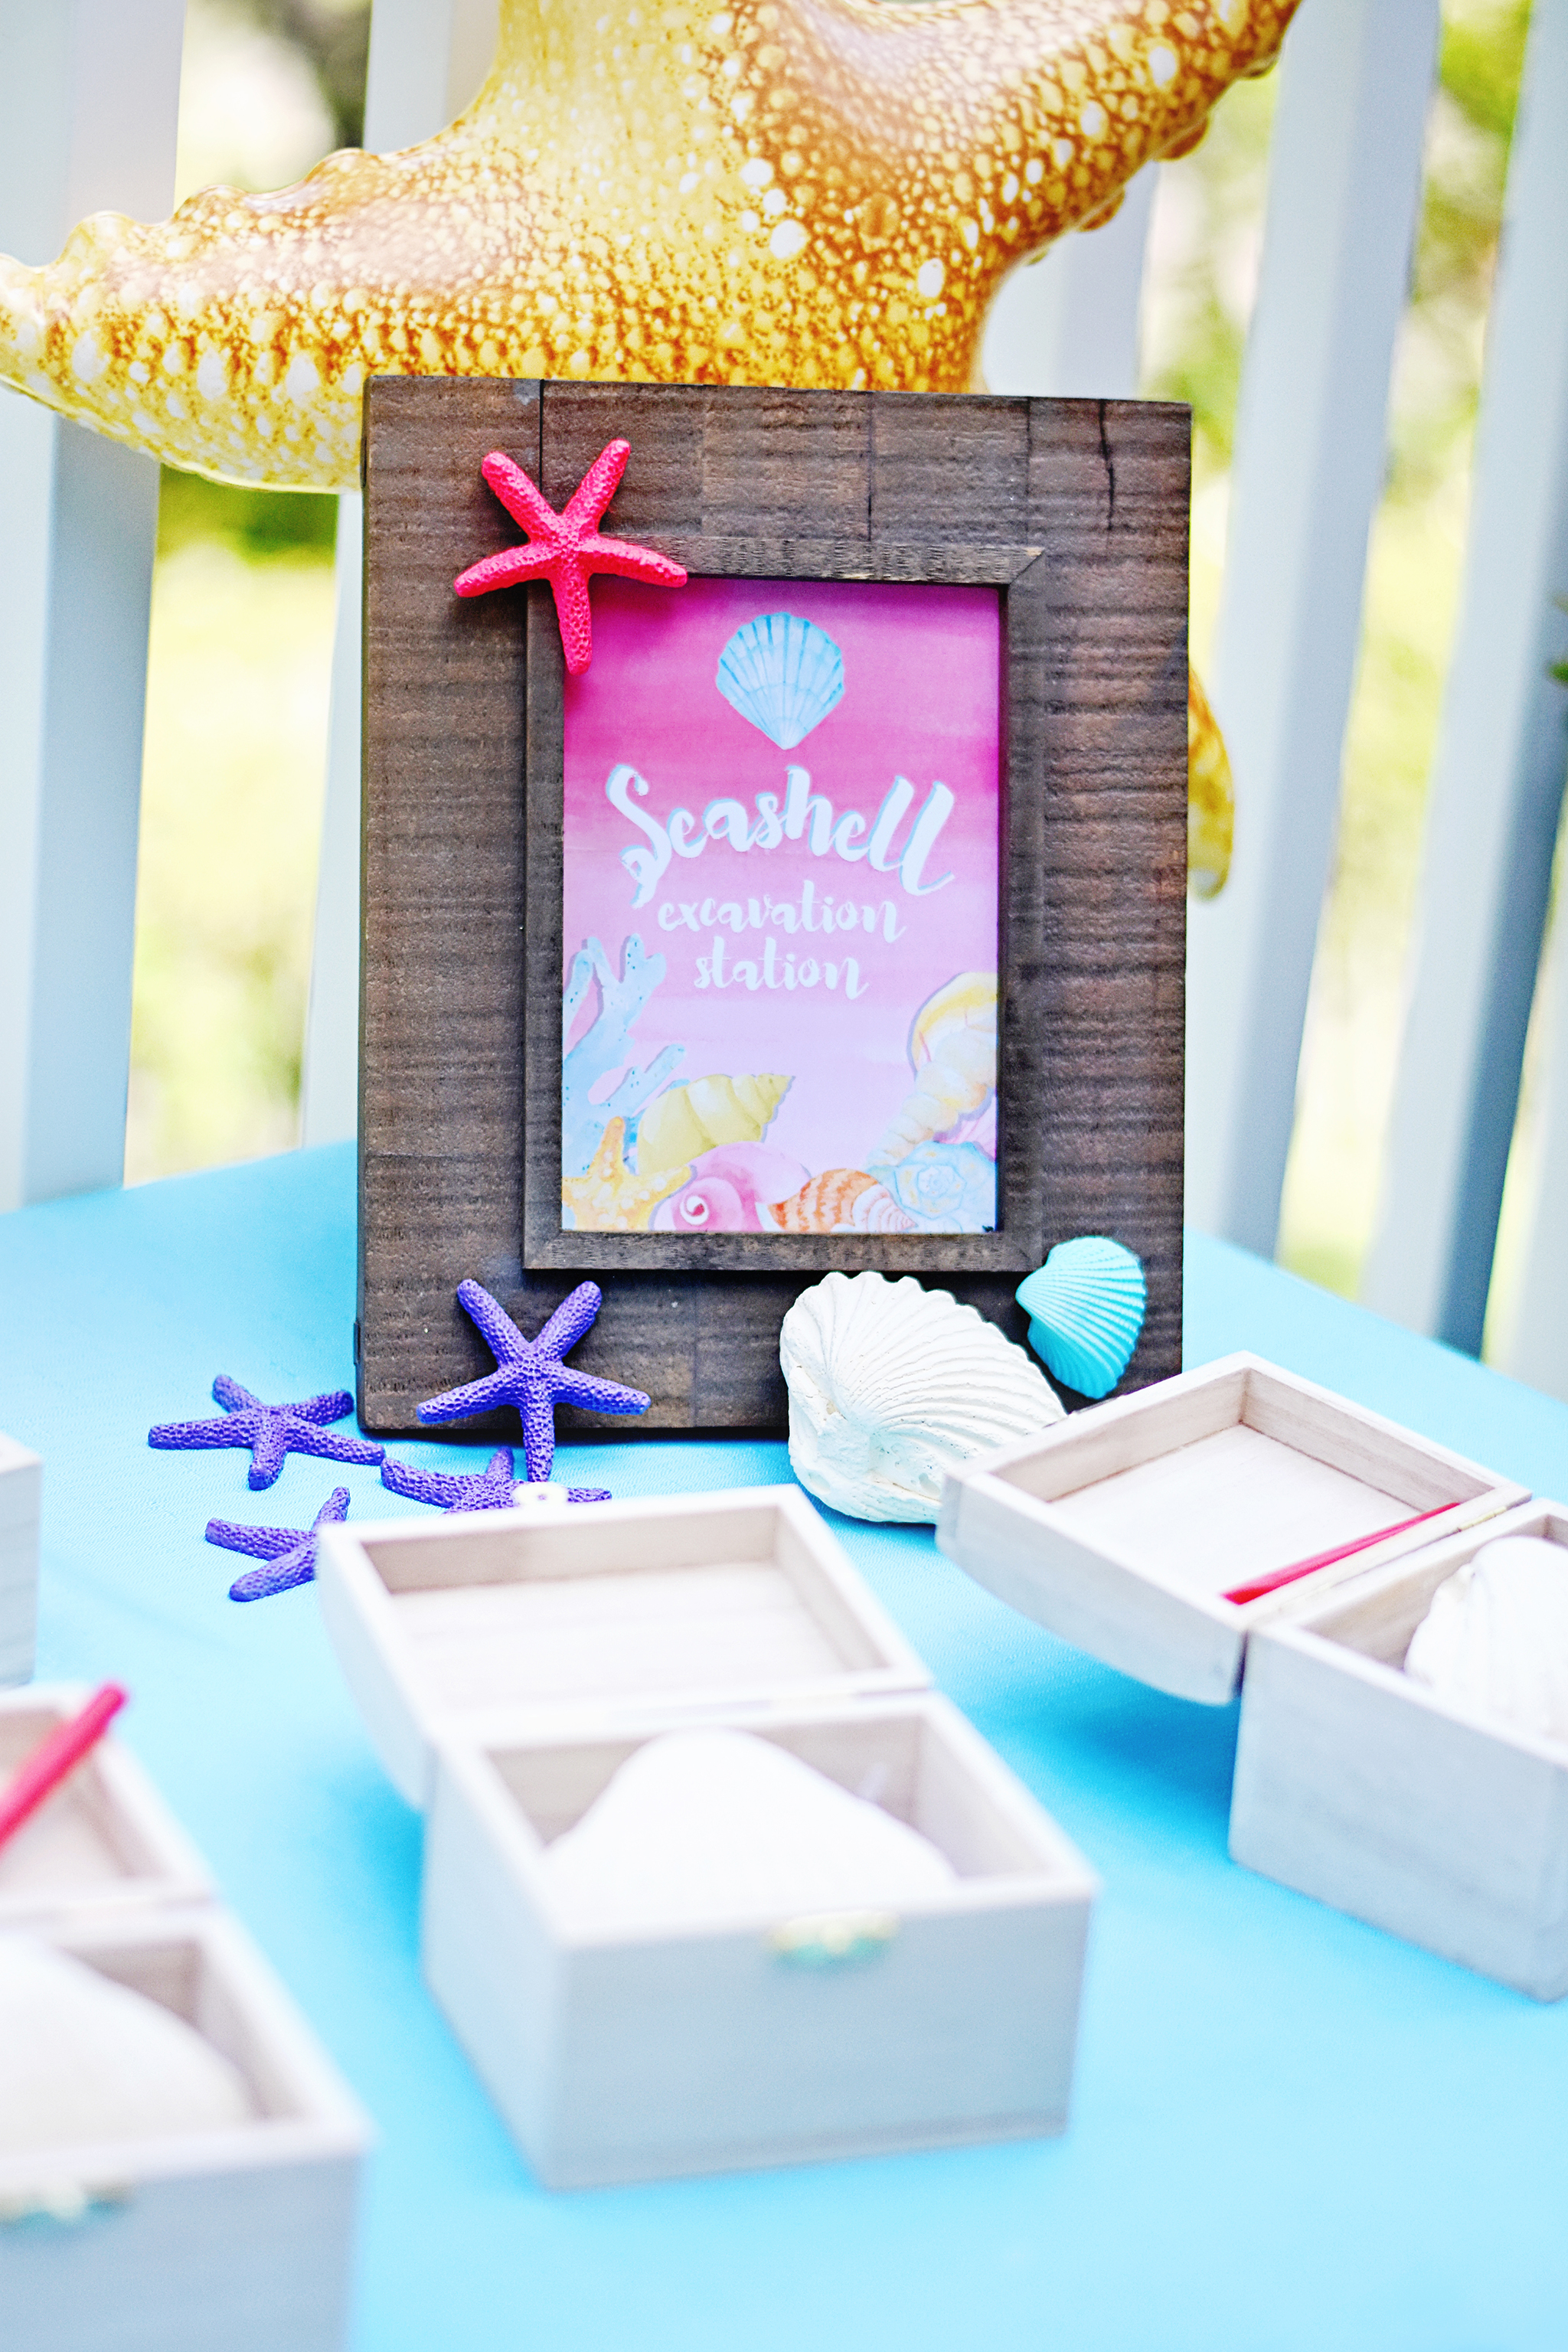 Create a "Seashell Excavation Station" at your Under the Sea party!